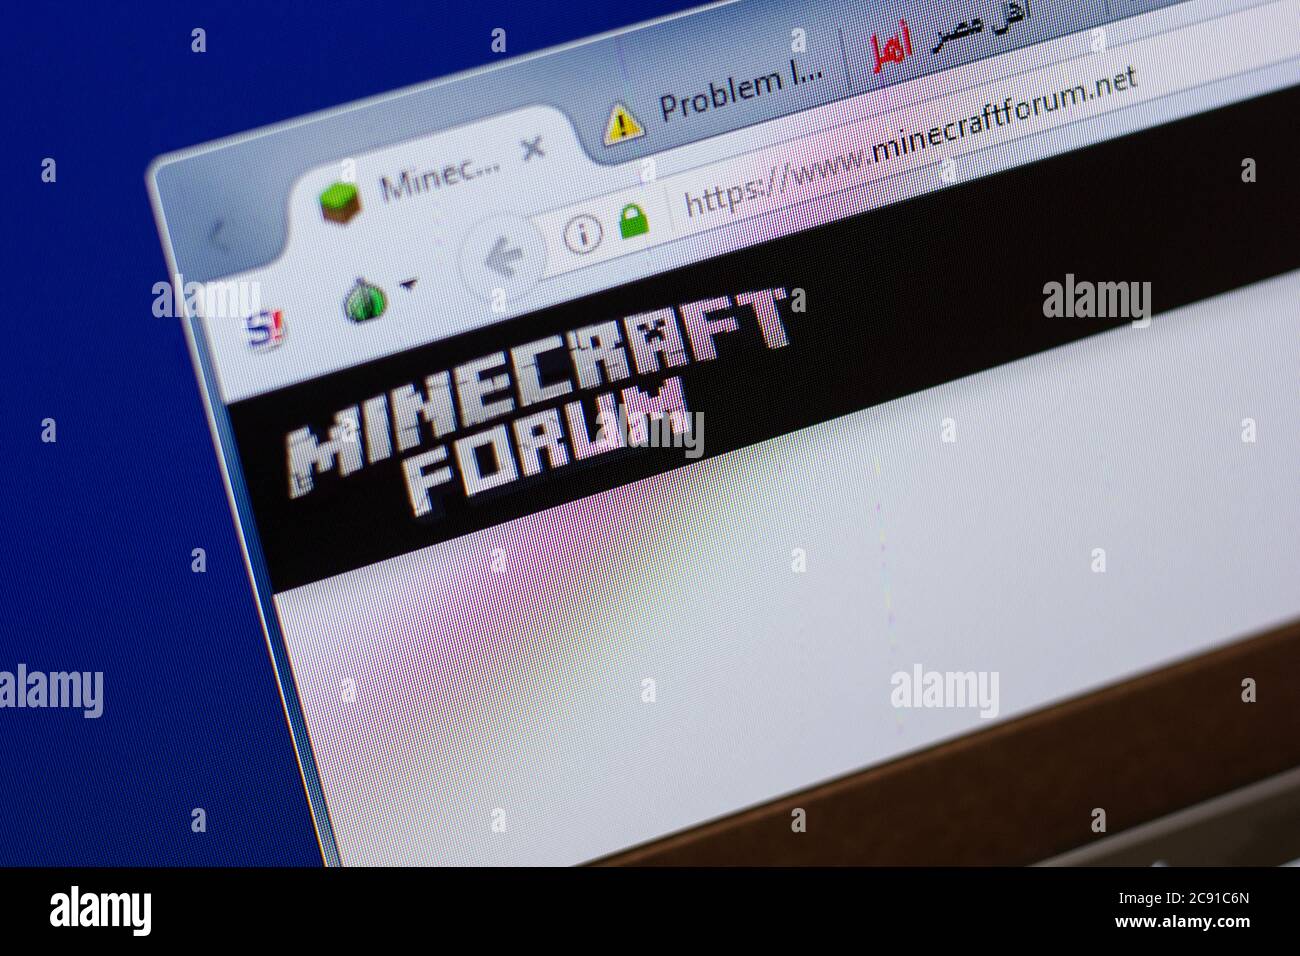 Android Logo - MCPE: Show Your Creation - Minecraft: Pocket Edition -  Minecraft Forum - Minecraft Forum